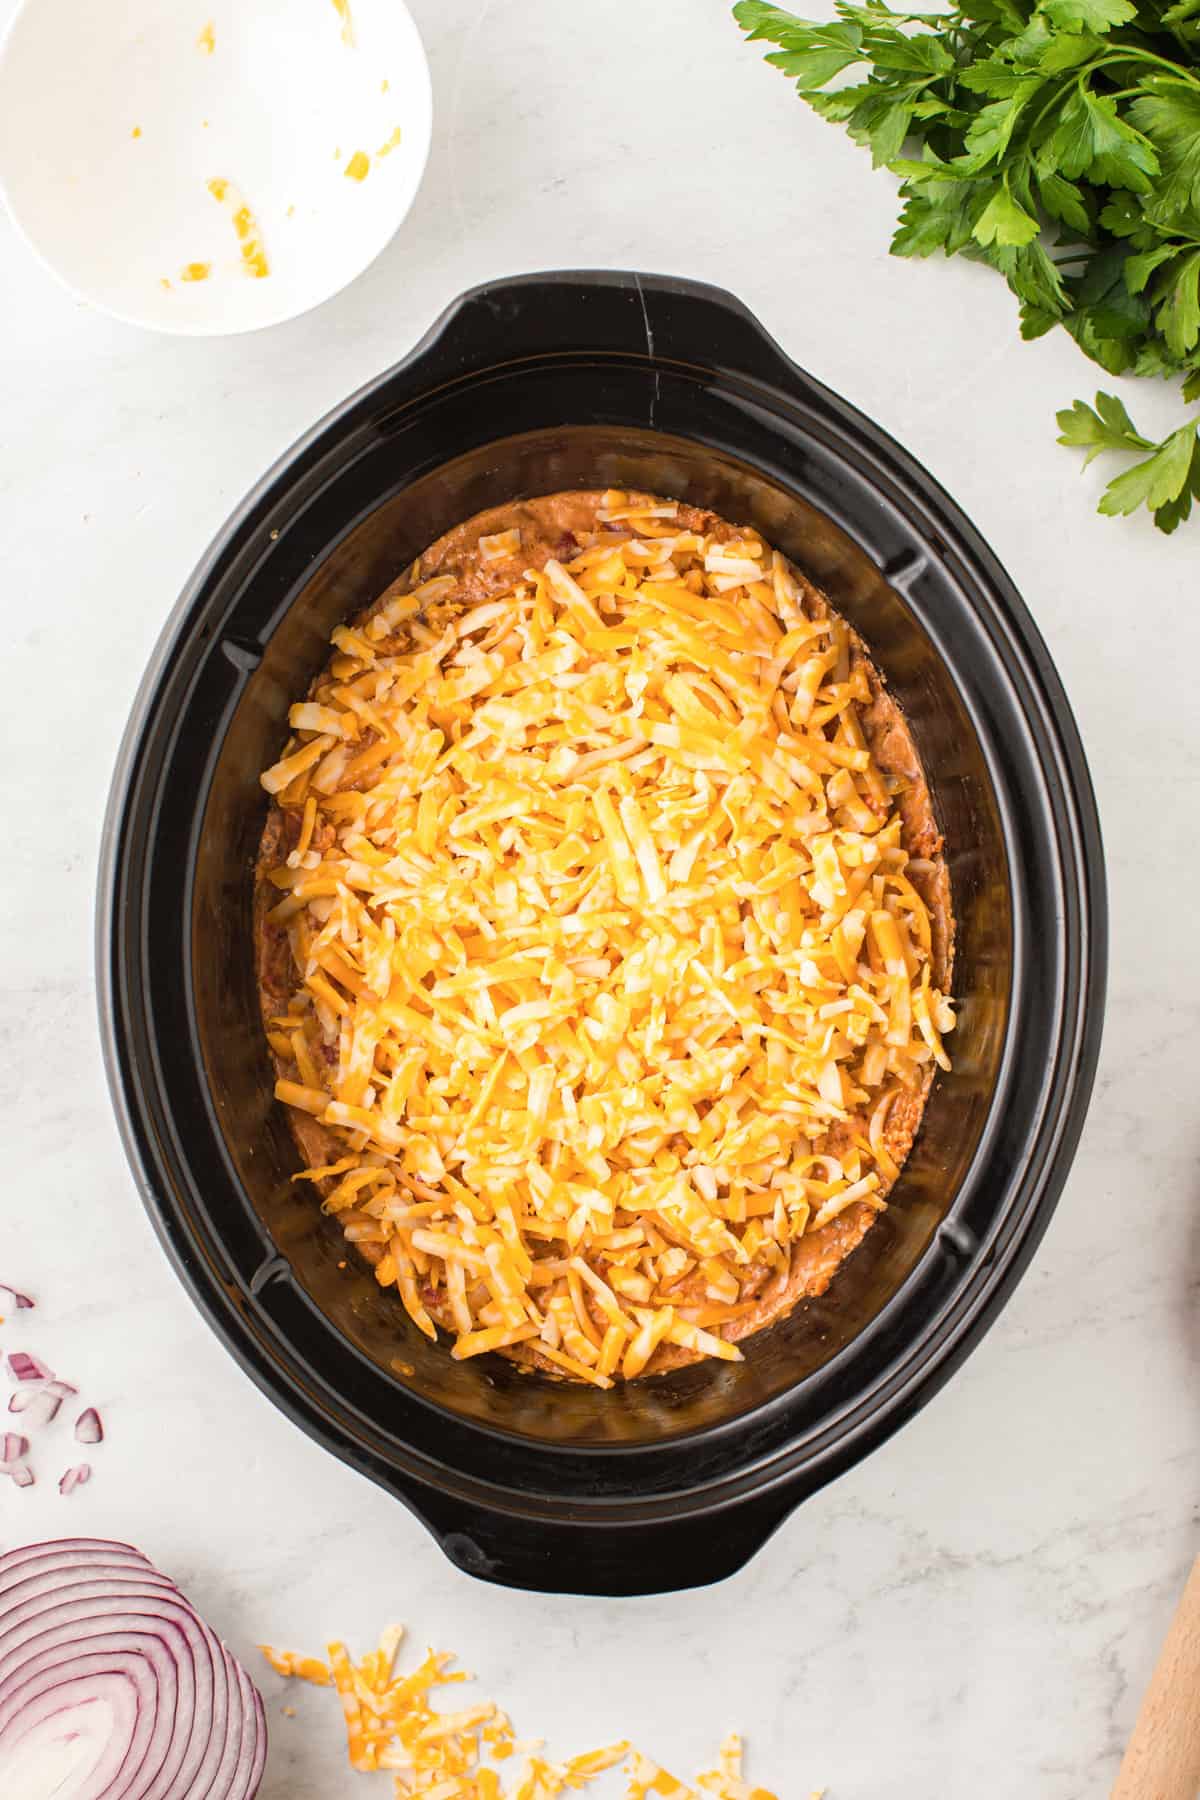 Shredded colby jack cheese sprinkled on top of dip in the slow cooker.